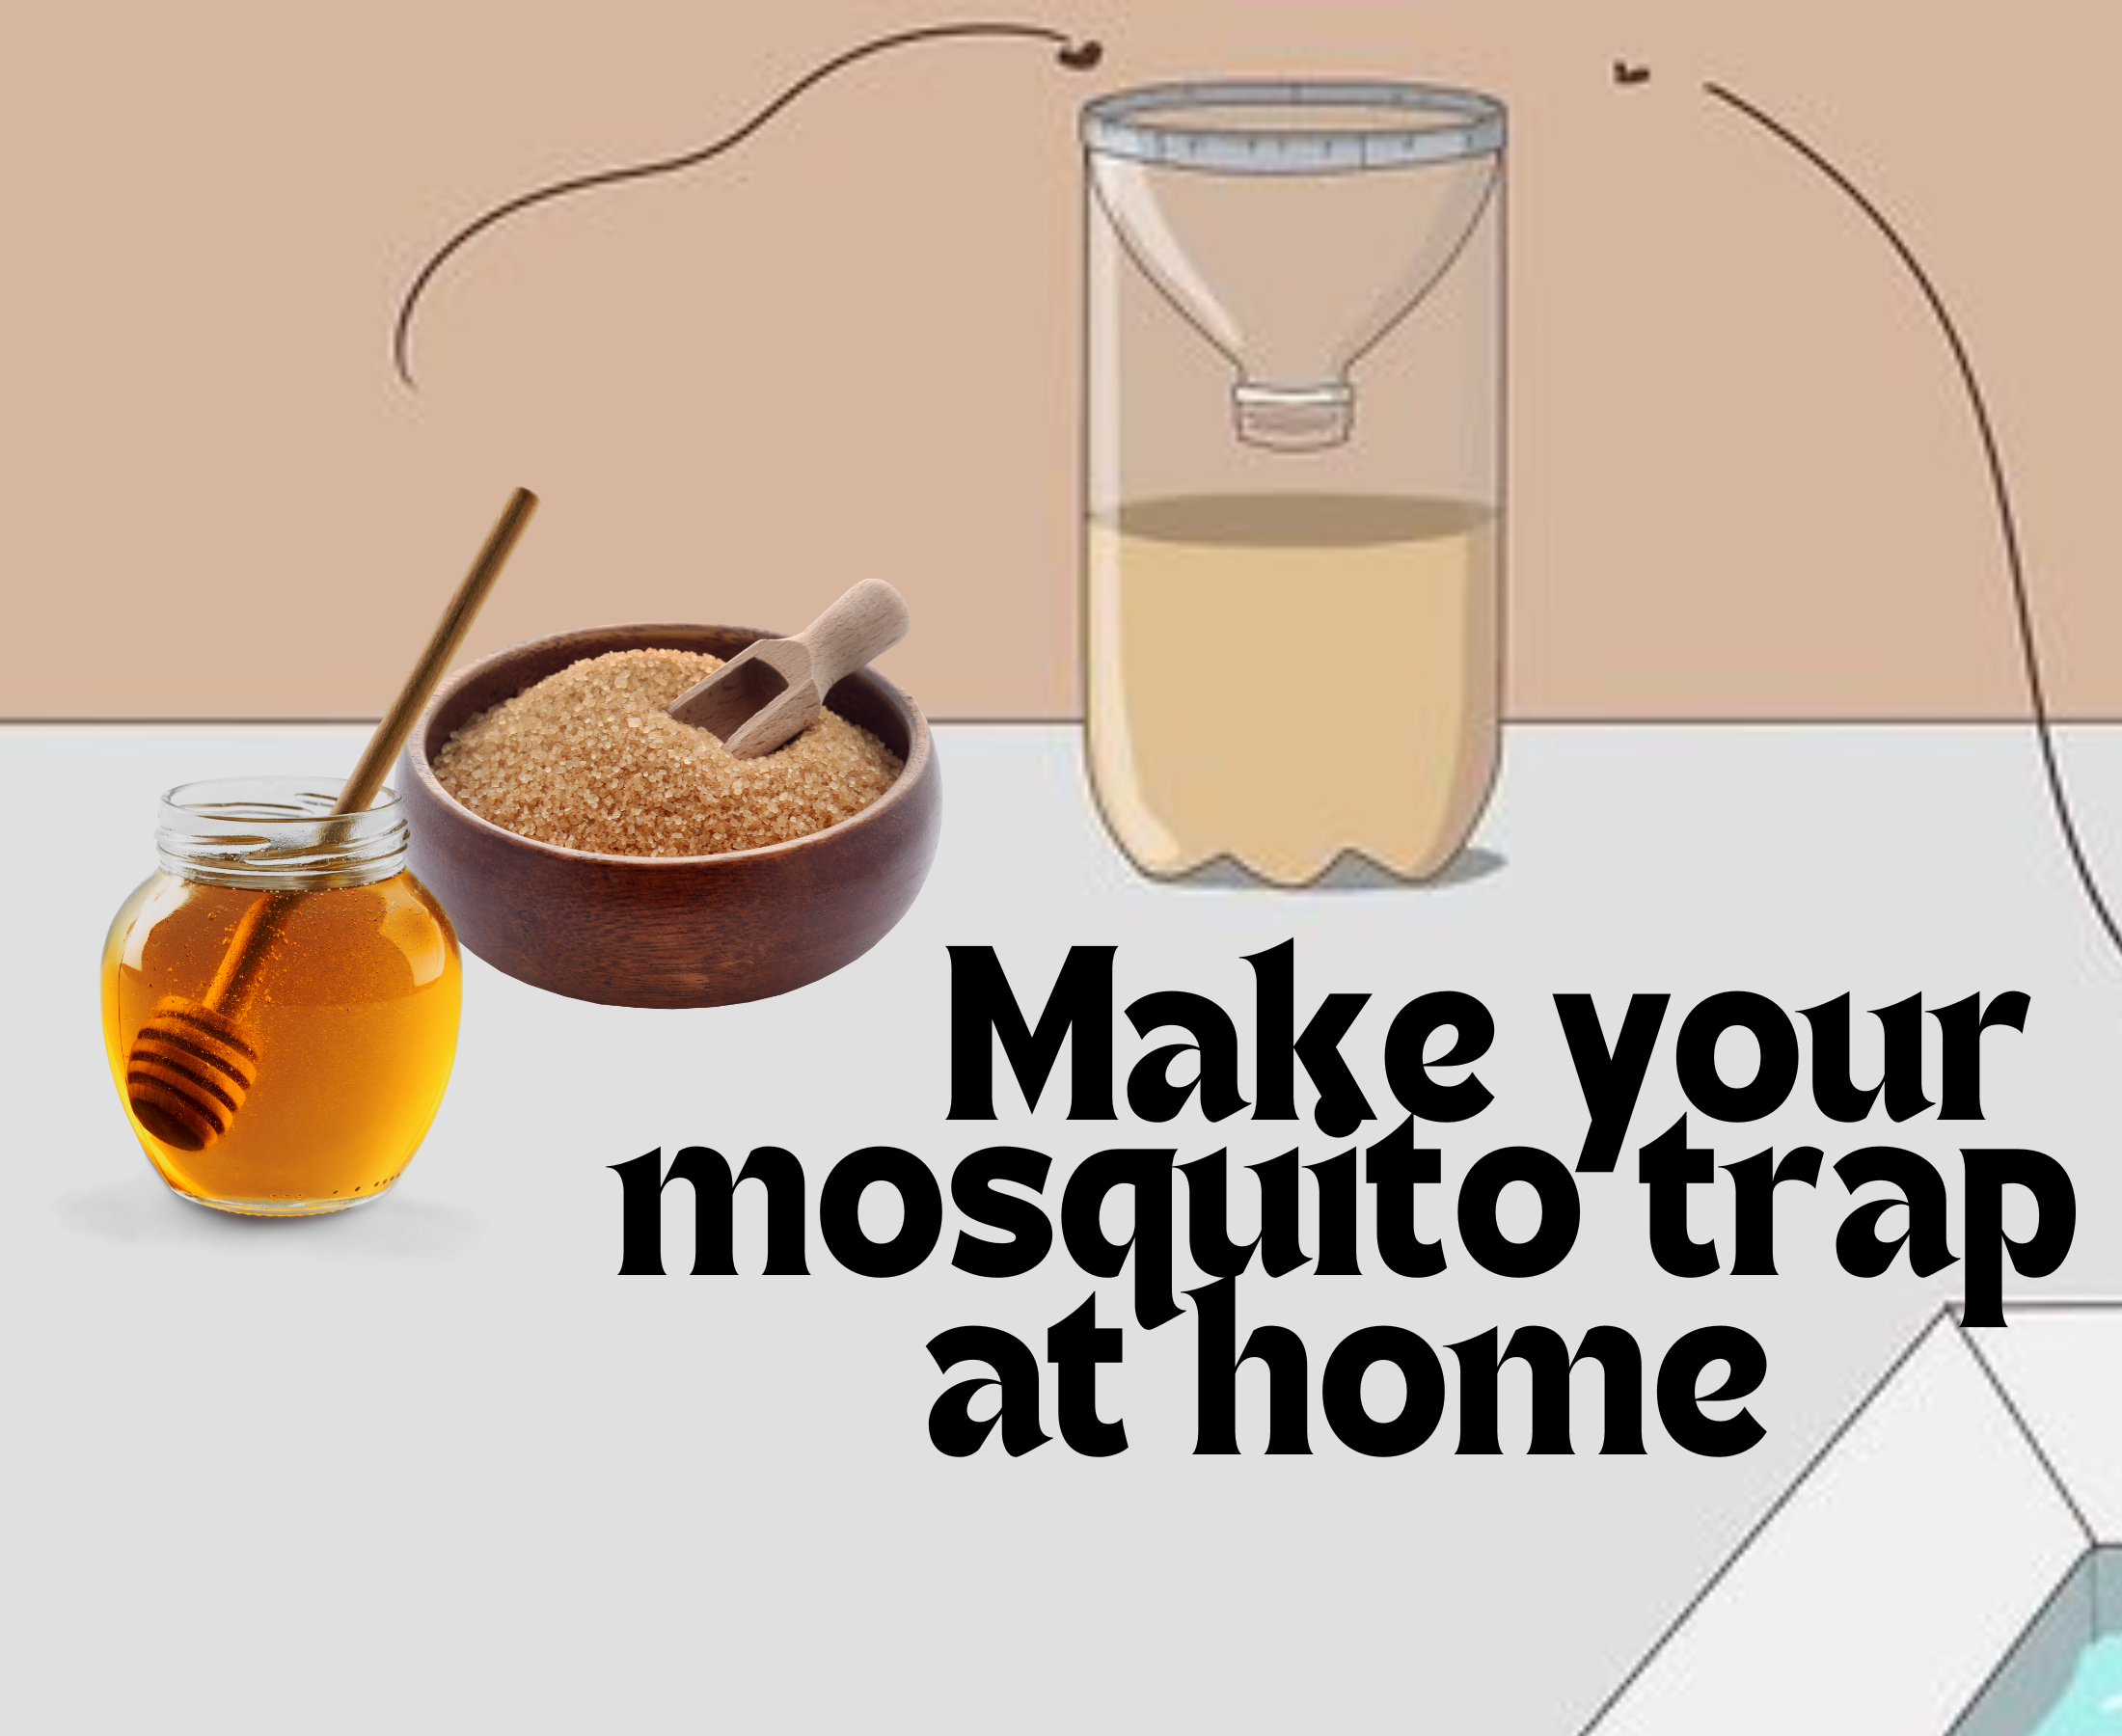 Does mosquito trap works? How to make mosquito trap at home?